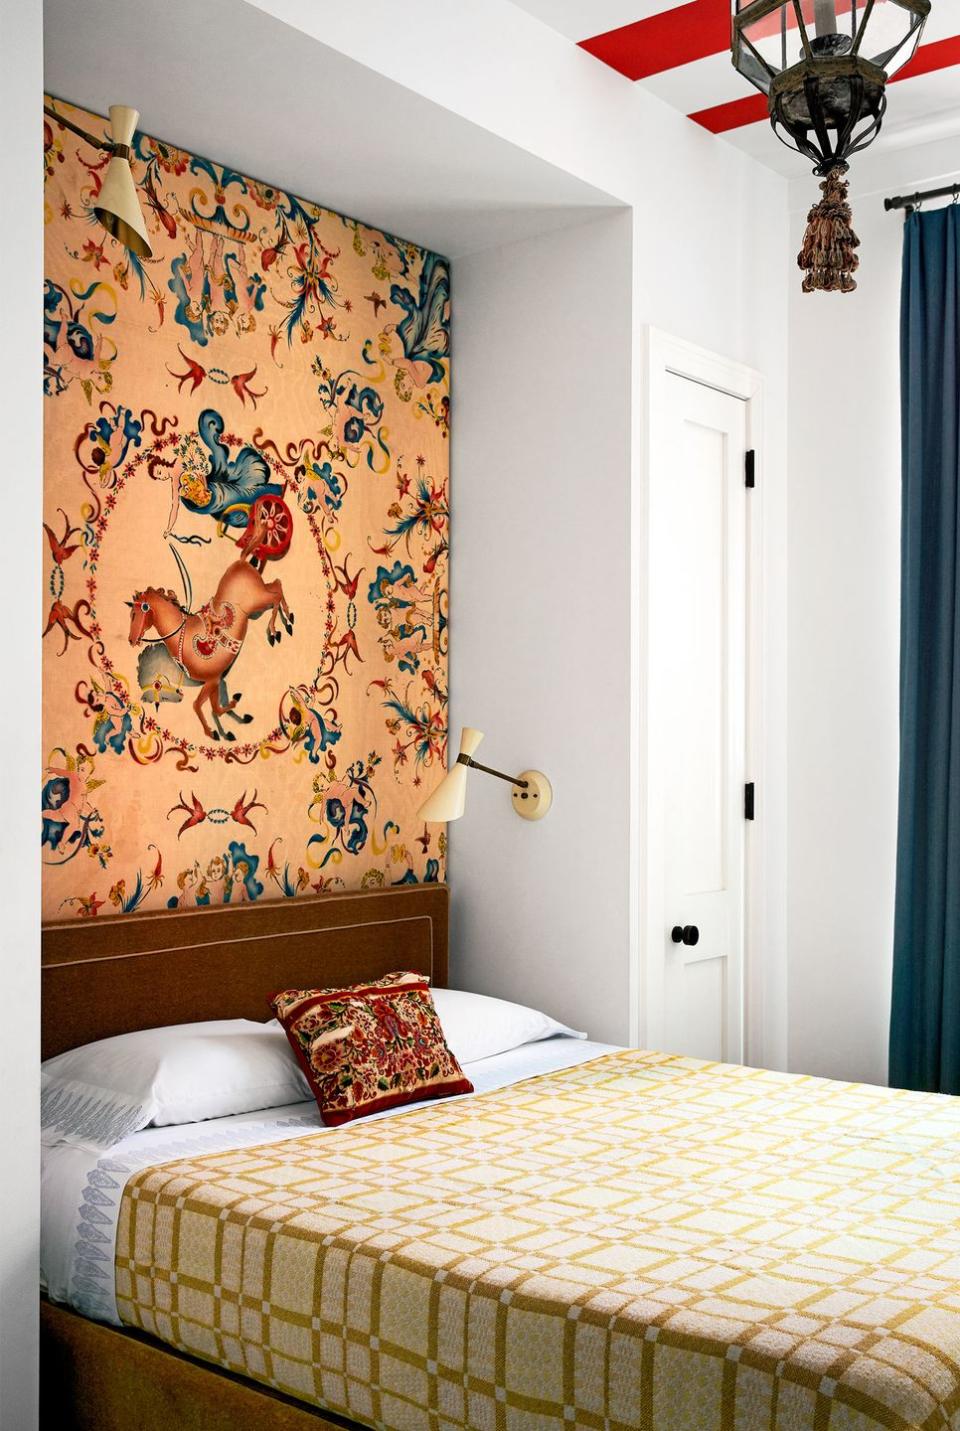 twin bed with golden yellow coverlet with rectangular pattern and a highly patterned wallpaper with a dancing horse and carriage at center over the head of the bed